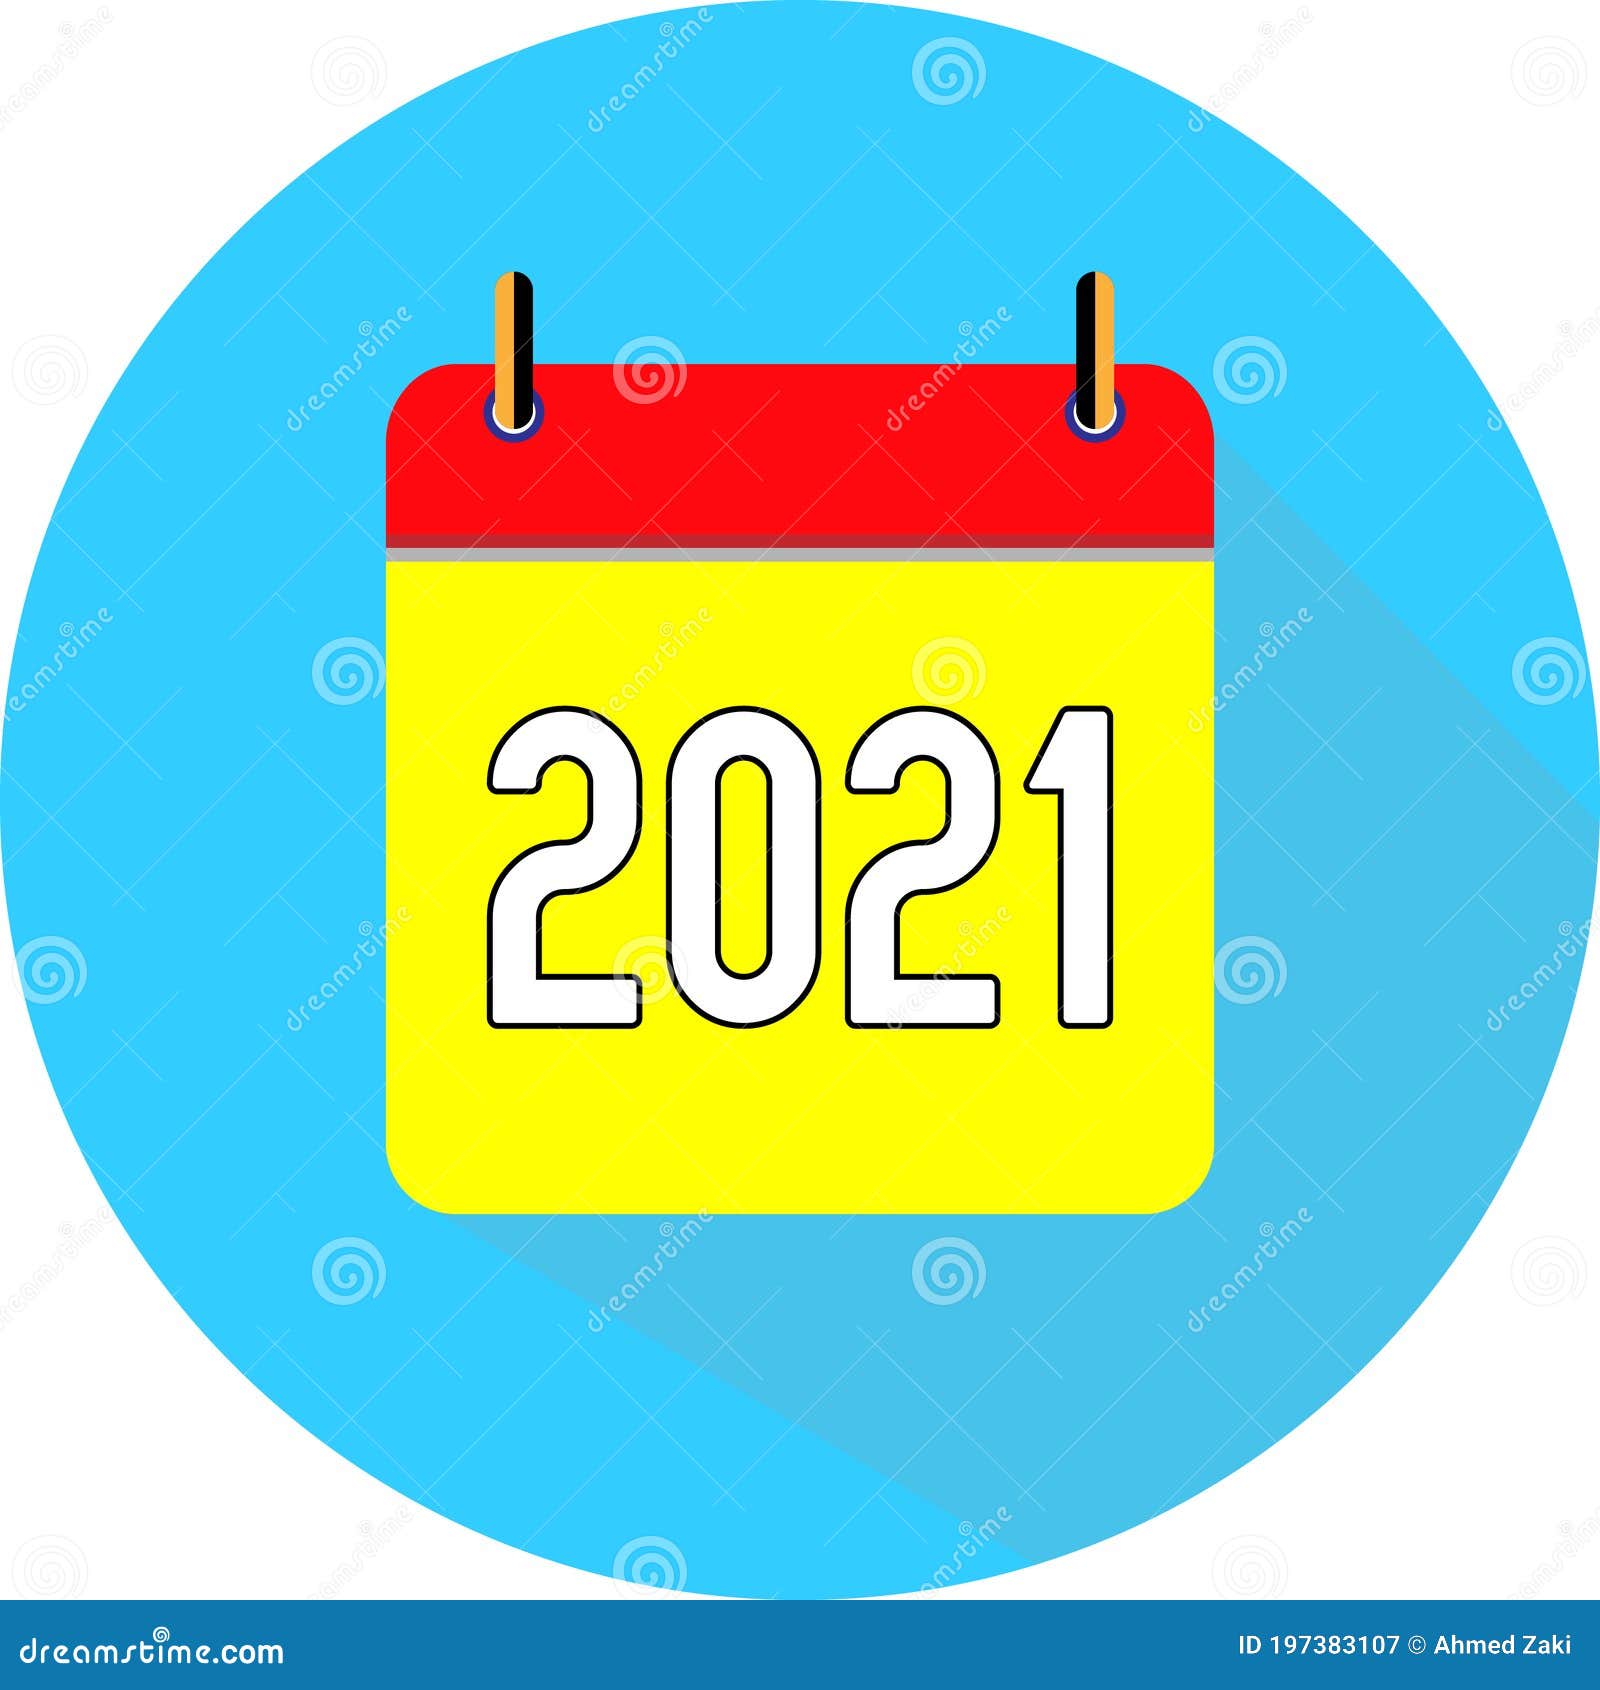 Time And Date Calendar 2021 Calculator Add To Or Subtract From A Date First Day Of The Week Option Allows To Choose Weeks Monday Through Sunday Which Is Commonly Used